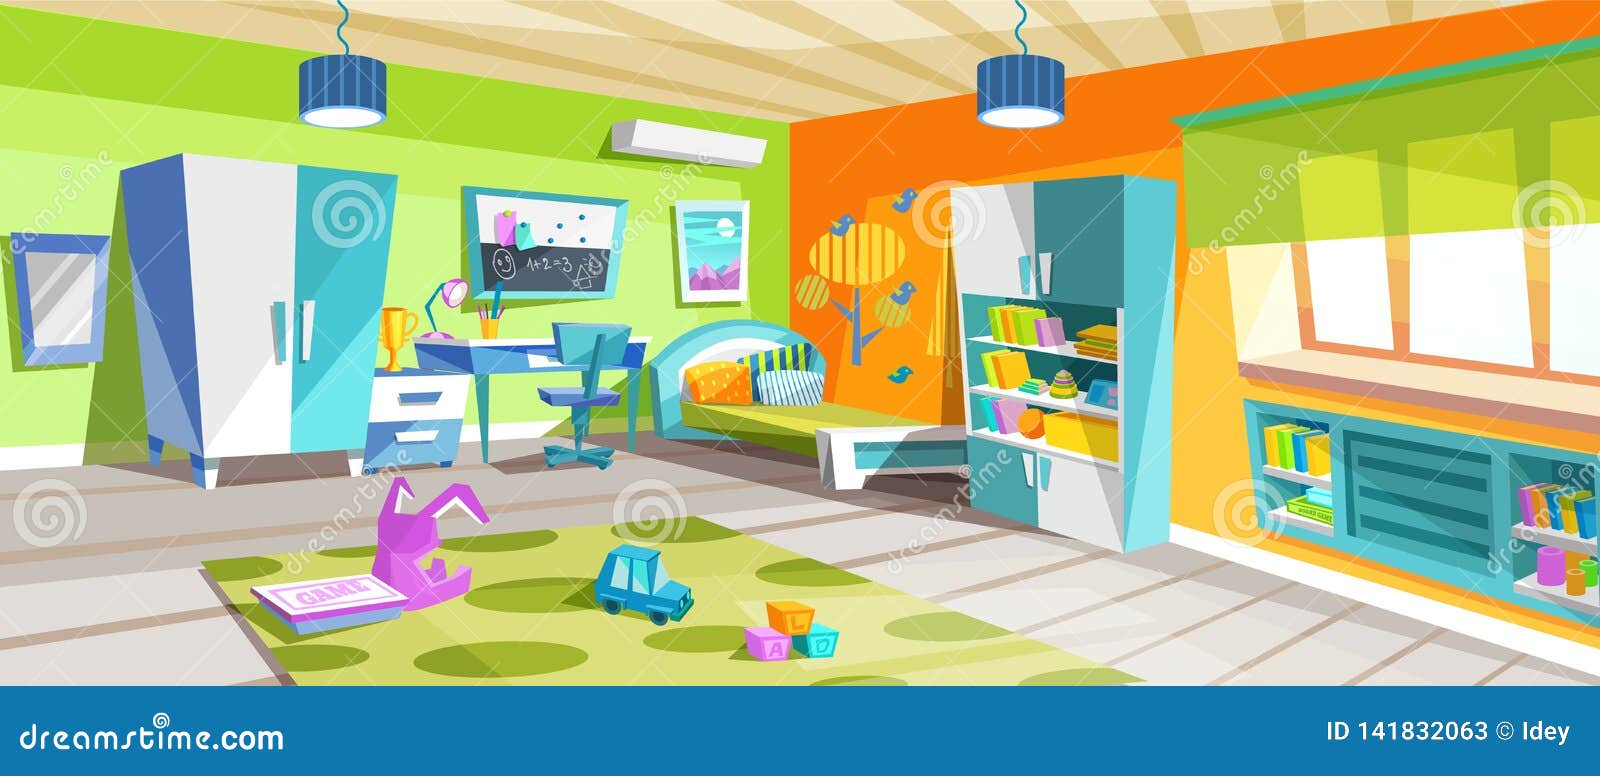 Bright Kids Room With Beautiful Furniture Working And Study